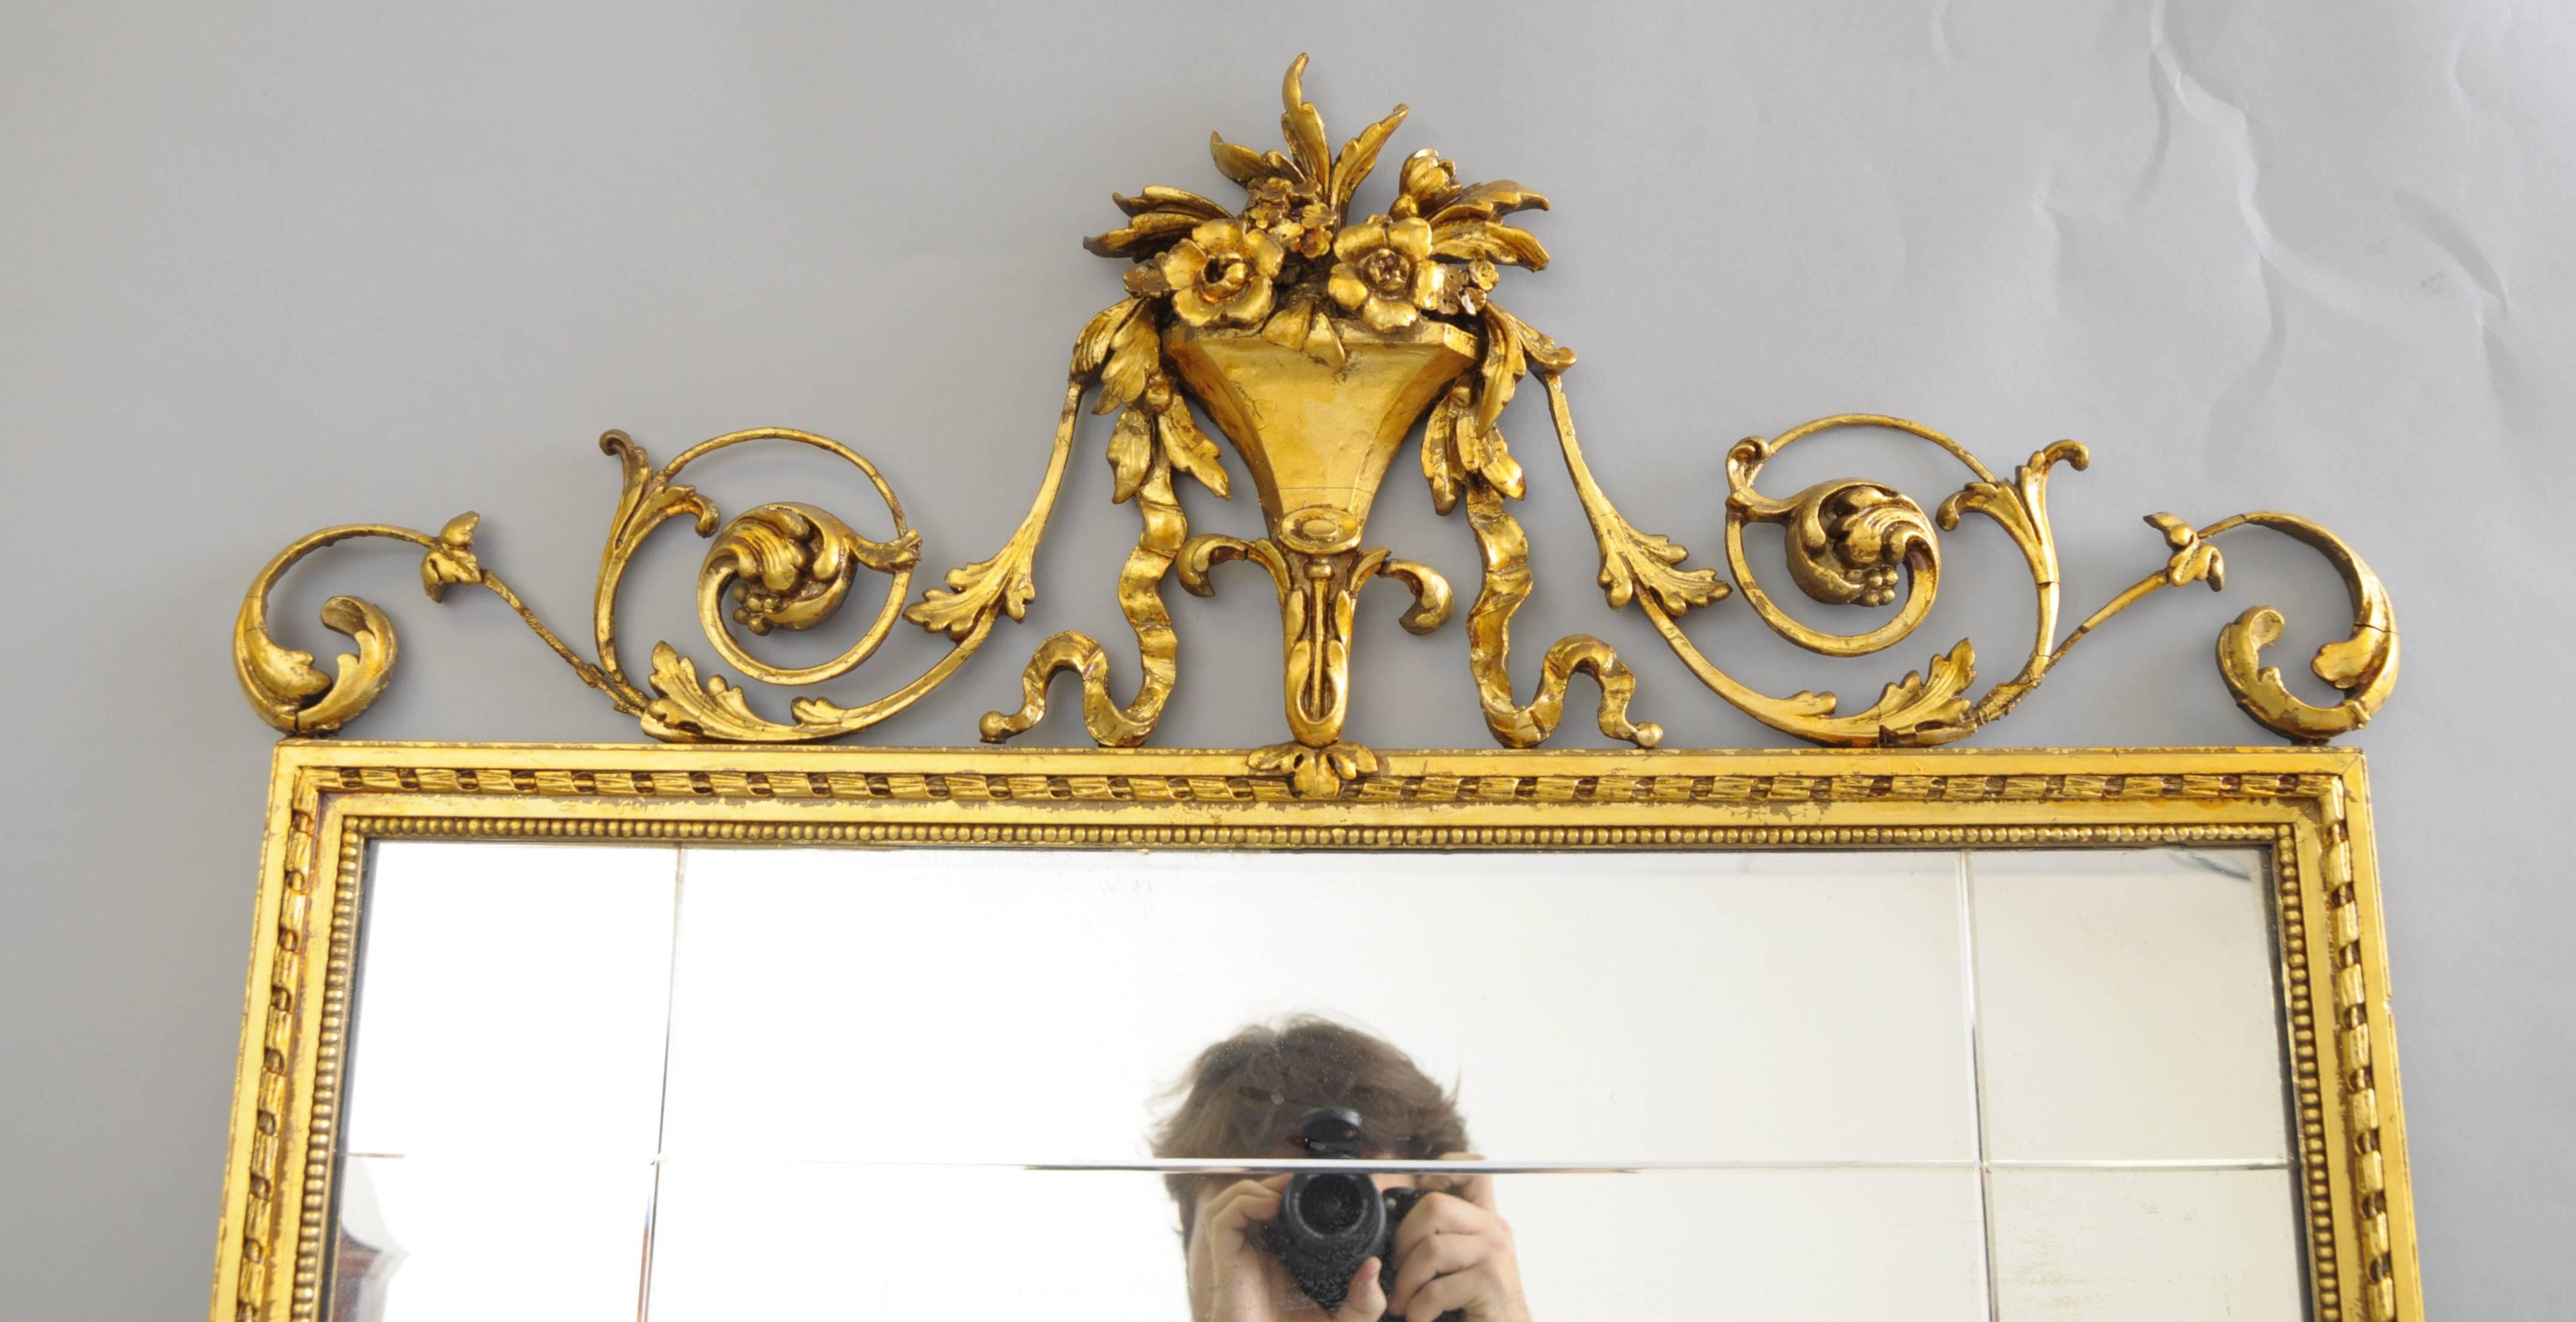 Early 20th Century carved gold giltwood and gesso English Robert Adam style rectangular wall mirror. Item features an iron and gesso blooming floral bouquet with draping acanthus leaves and bell flowers. The giltwood and gold leaf frame displays